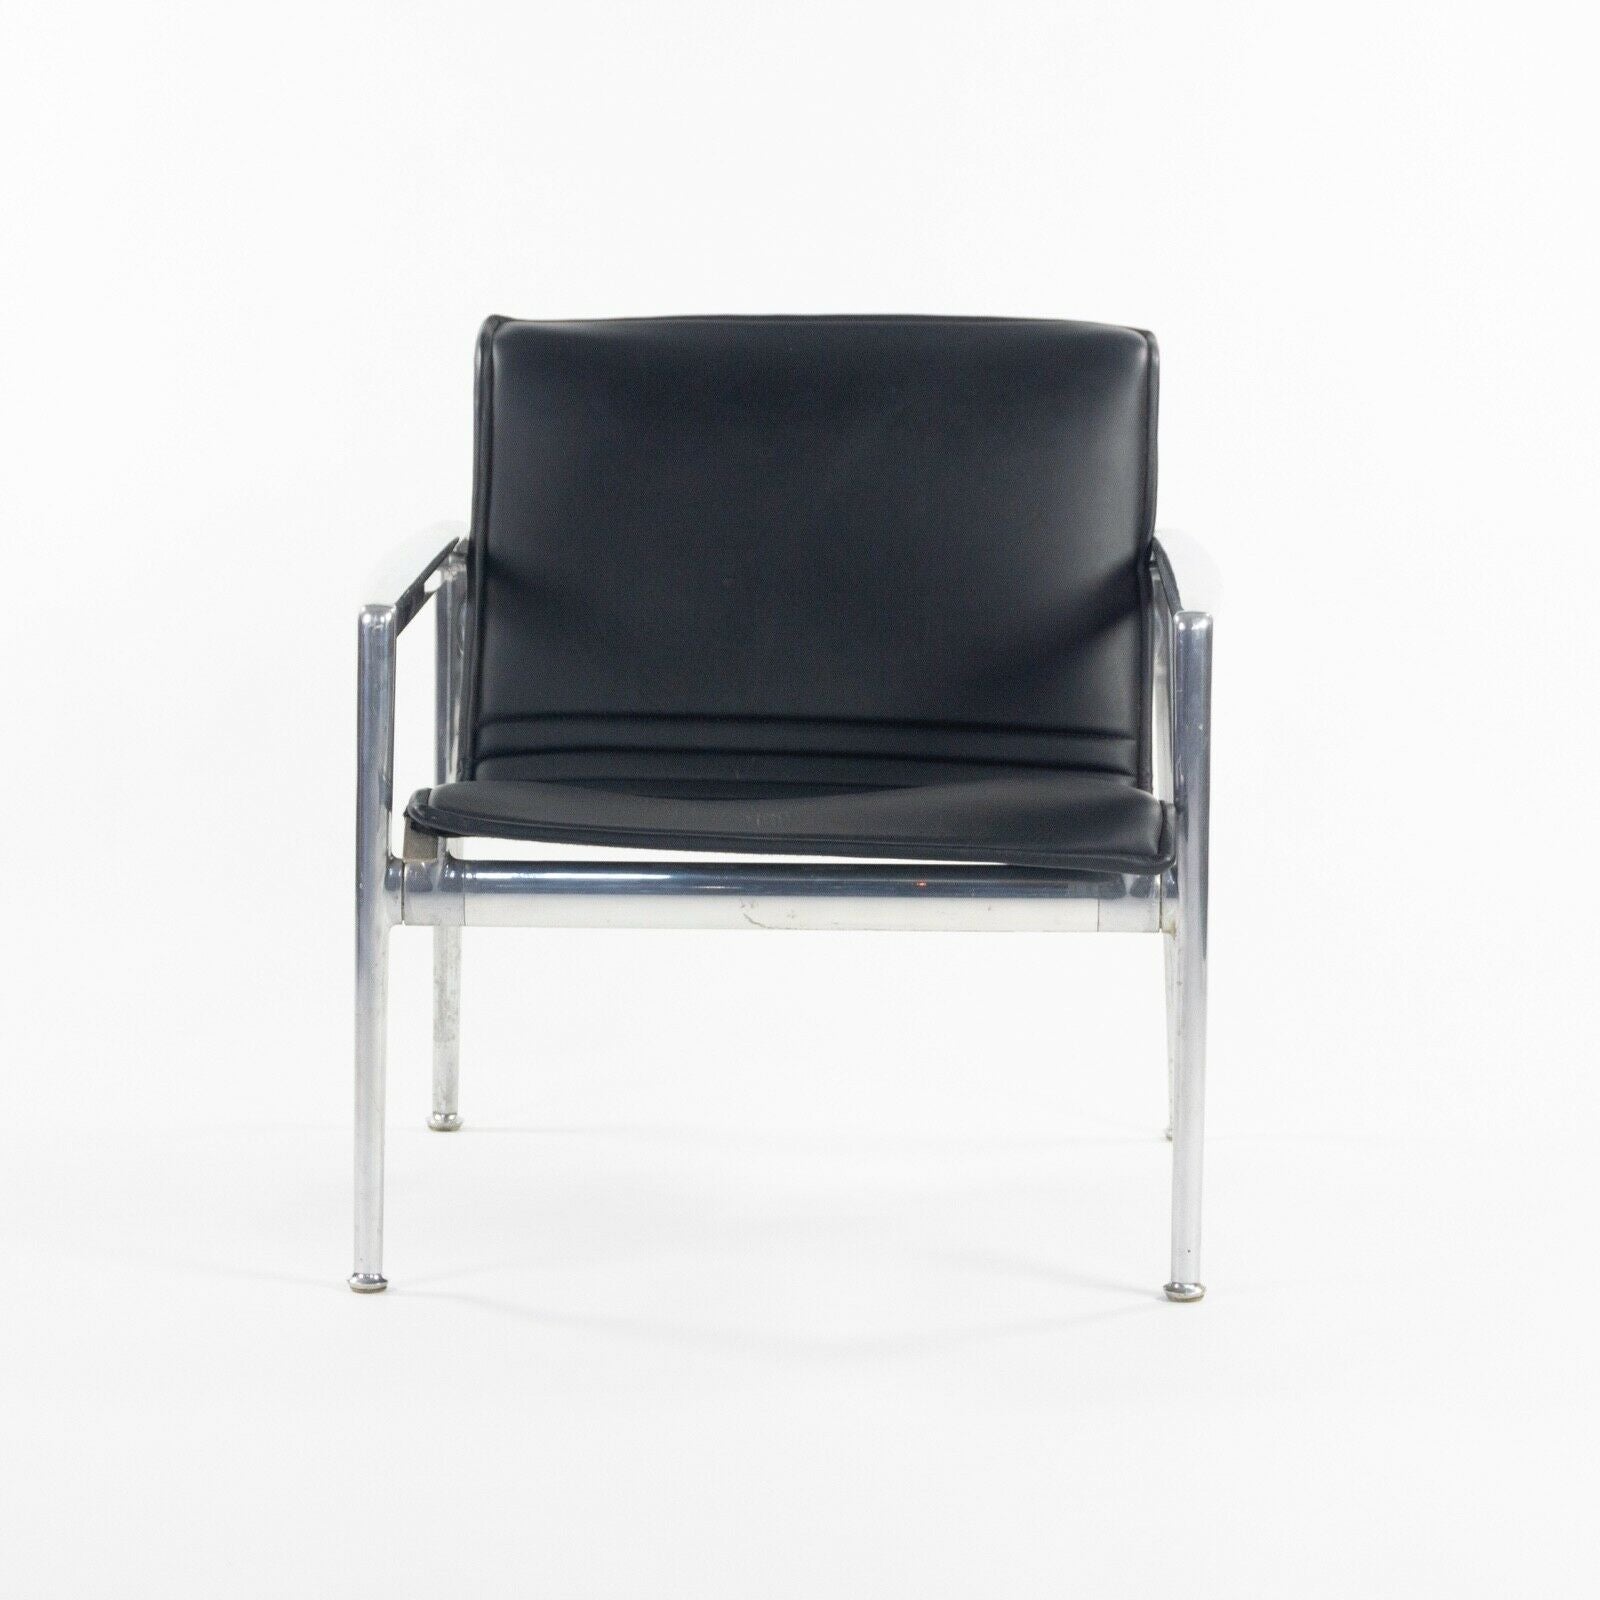 SOLD 1966 Collection Prototype Richard Schultz Polished Aluminum Leather Lounge Chair